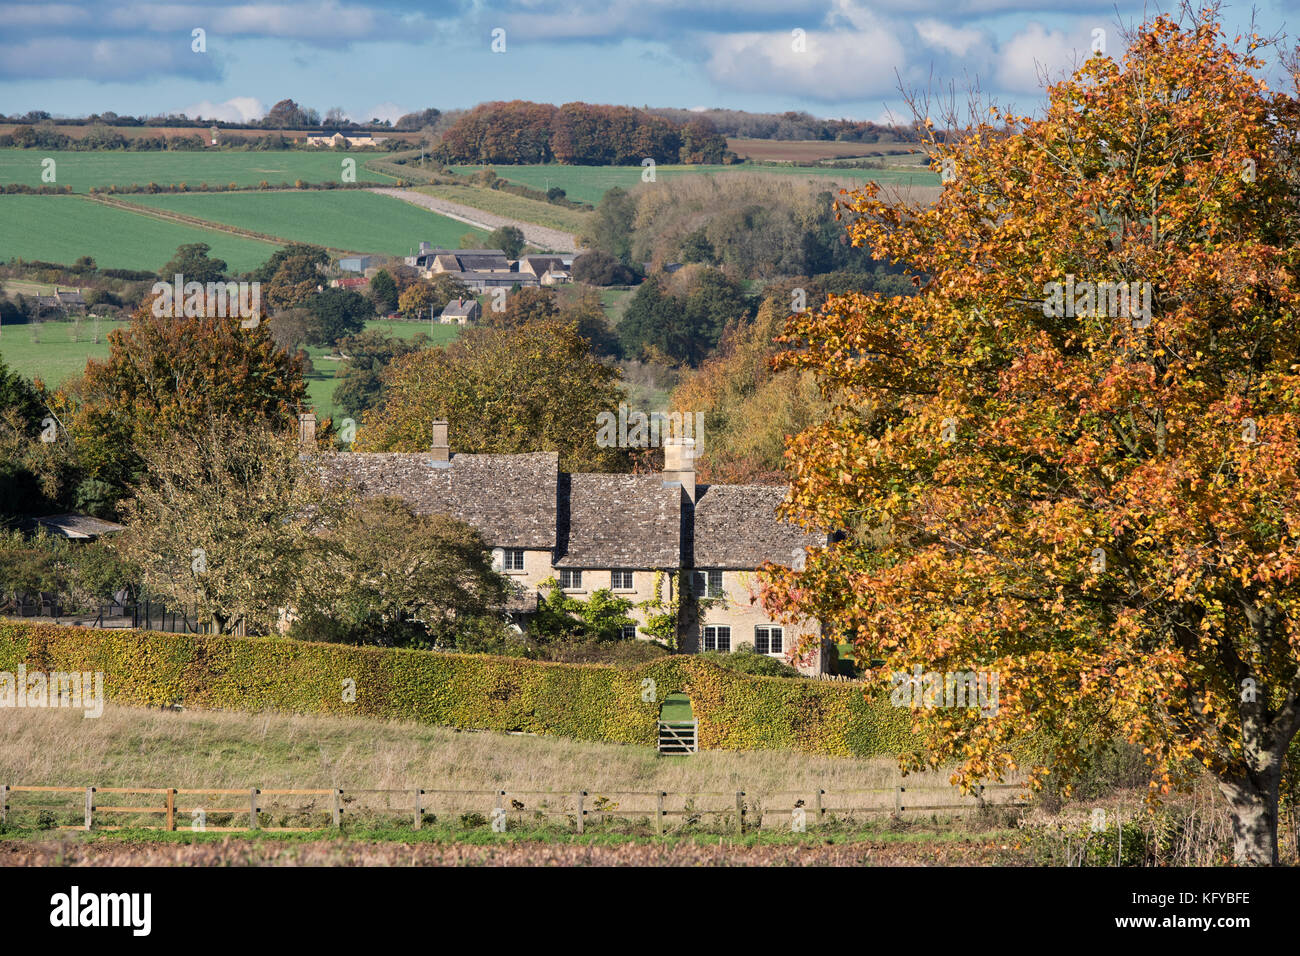 Stone house in autumn. Chilson, Evenlode Valley, Oxfordshire, England Stock Photo